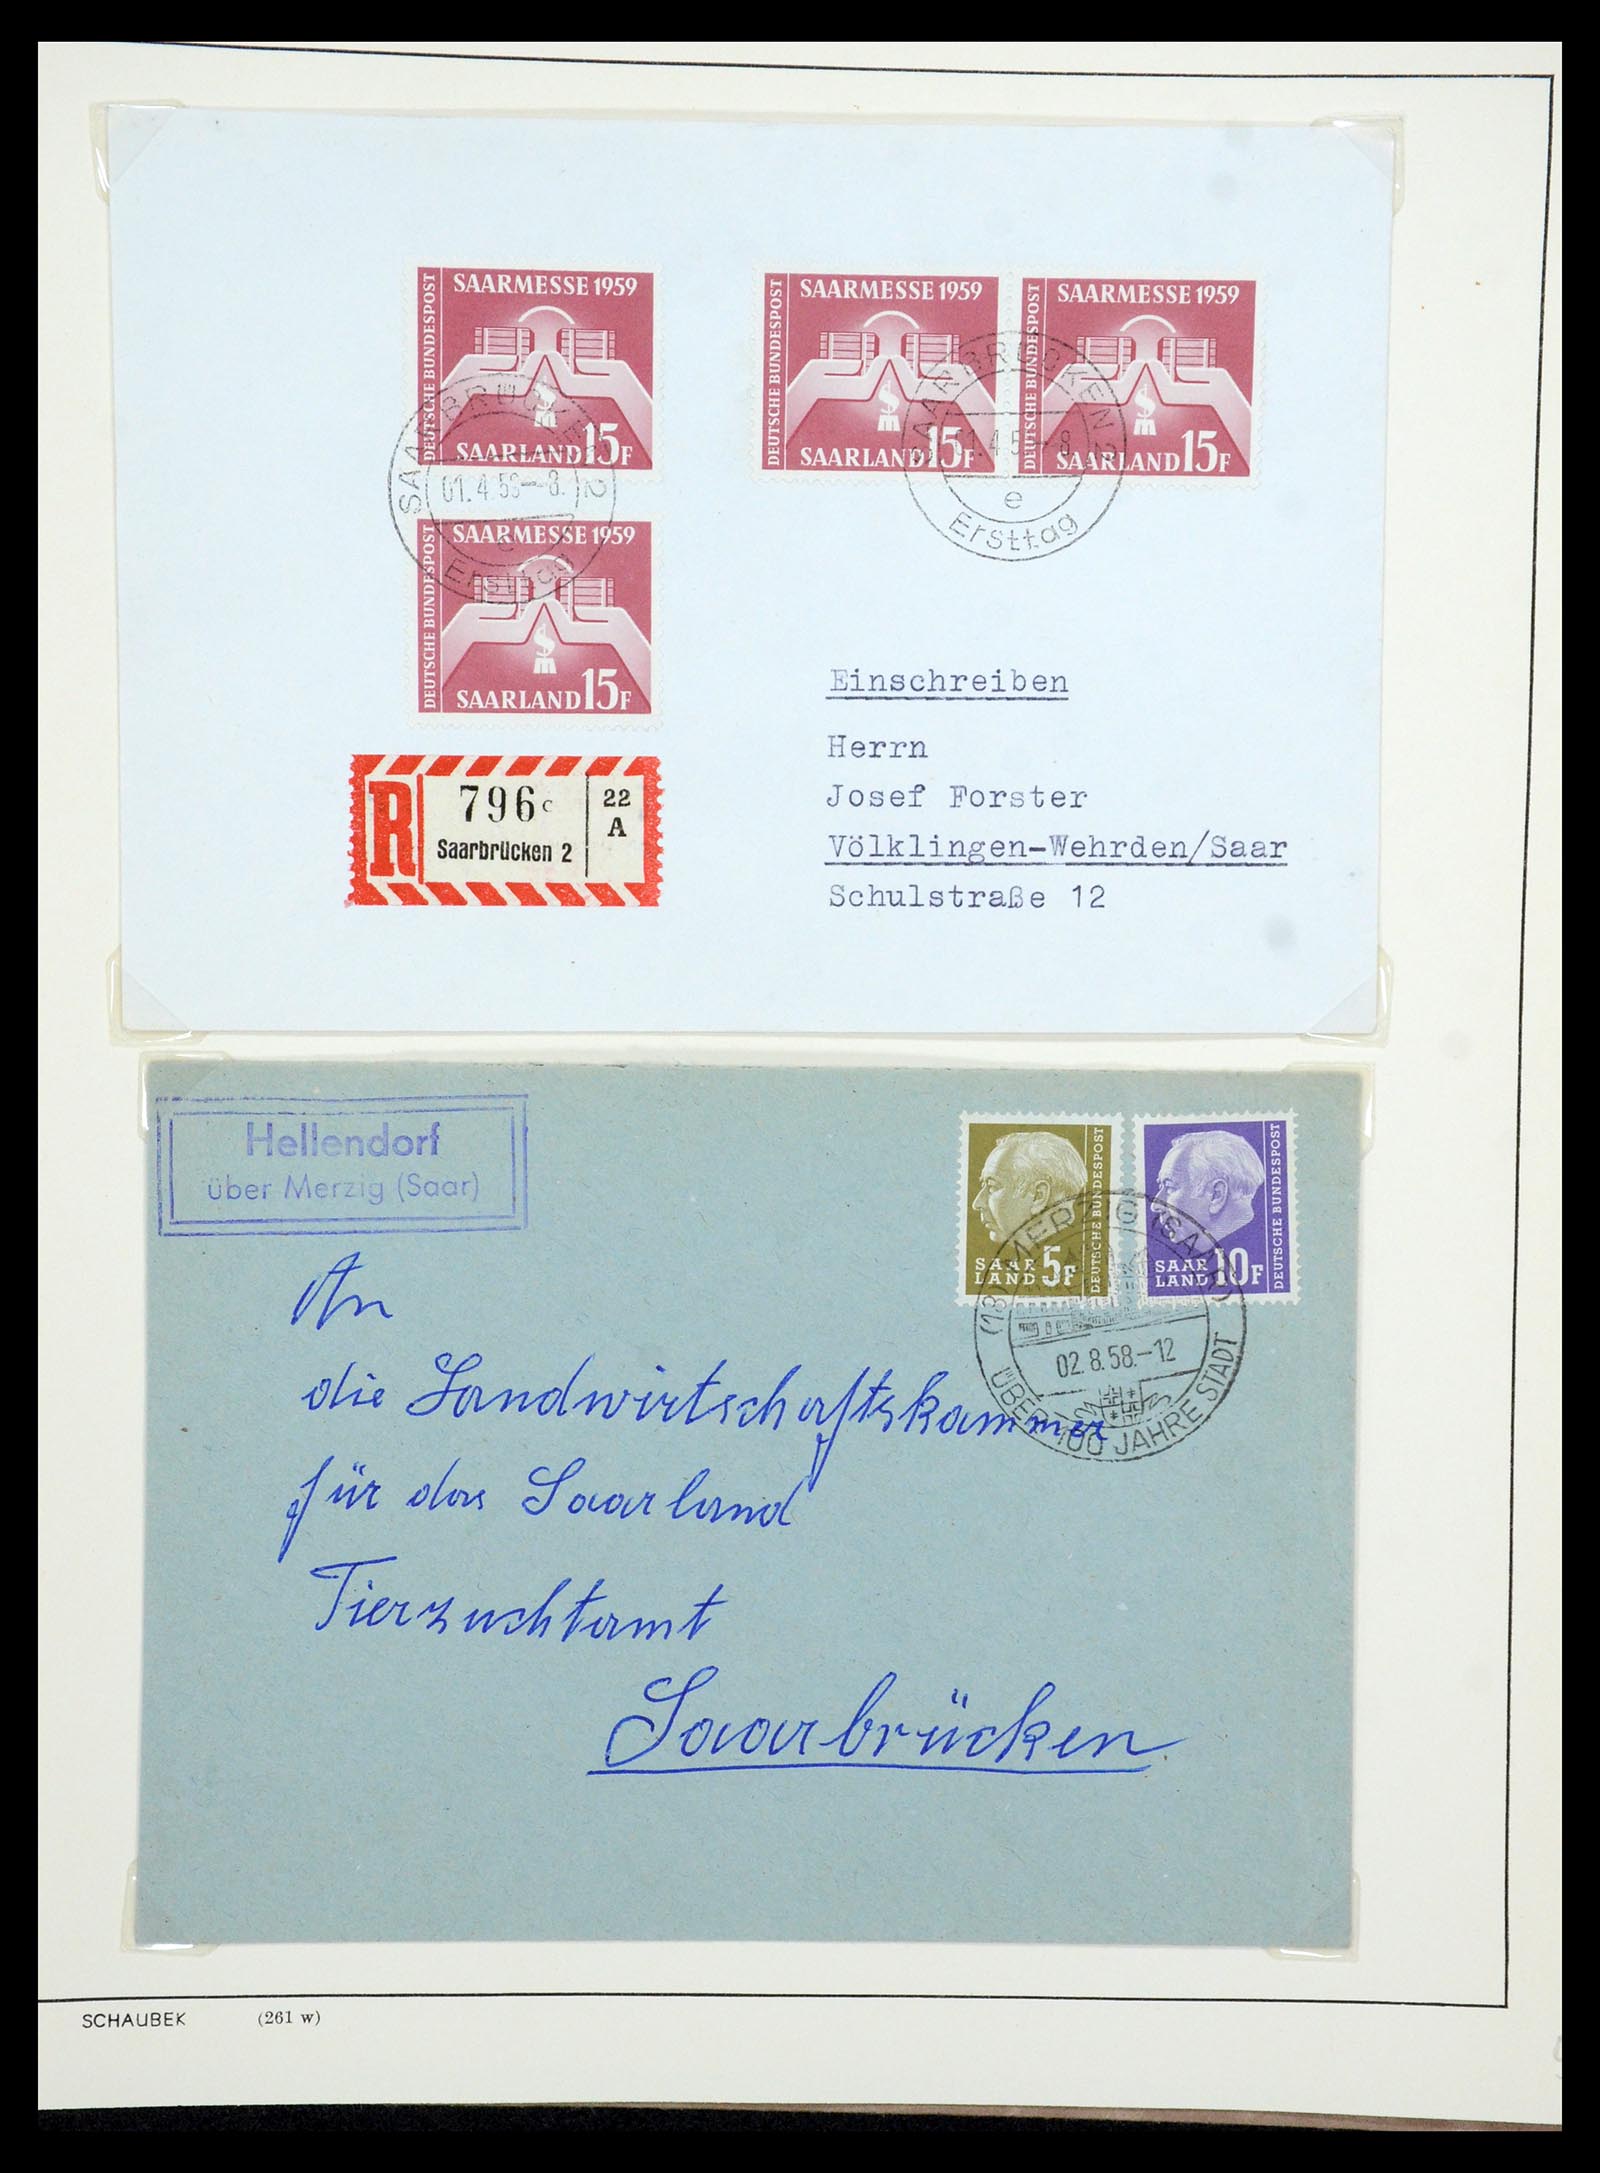 35483 104 - Stamp Collection 35483 Saar covers and FDC's 1948-1959.